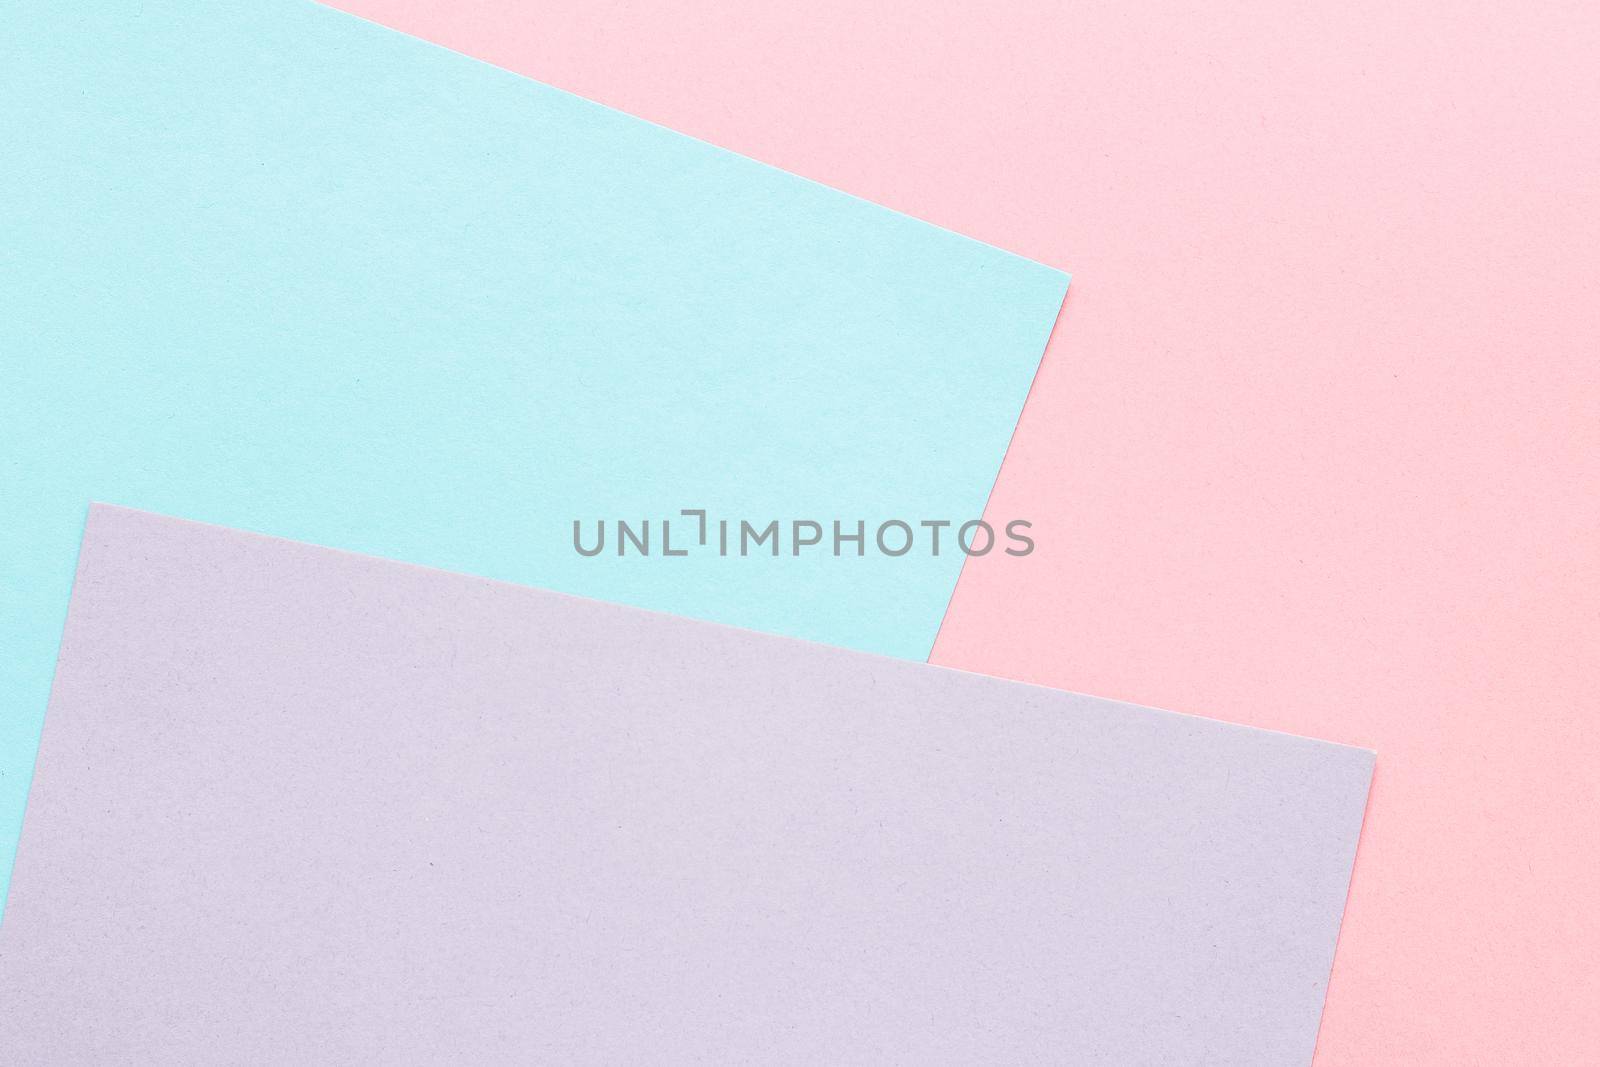 Brand identity, graphic design and business card set concept - Blank paper textured background, stationery mockup